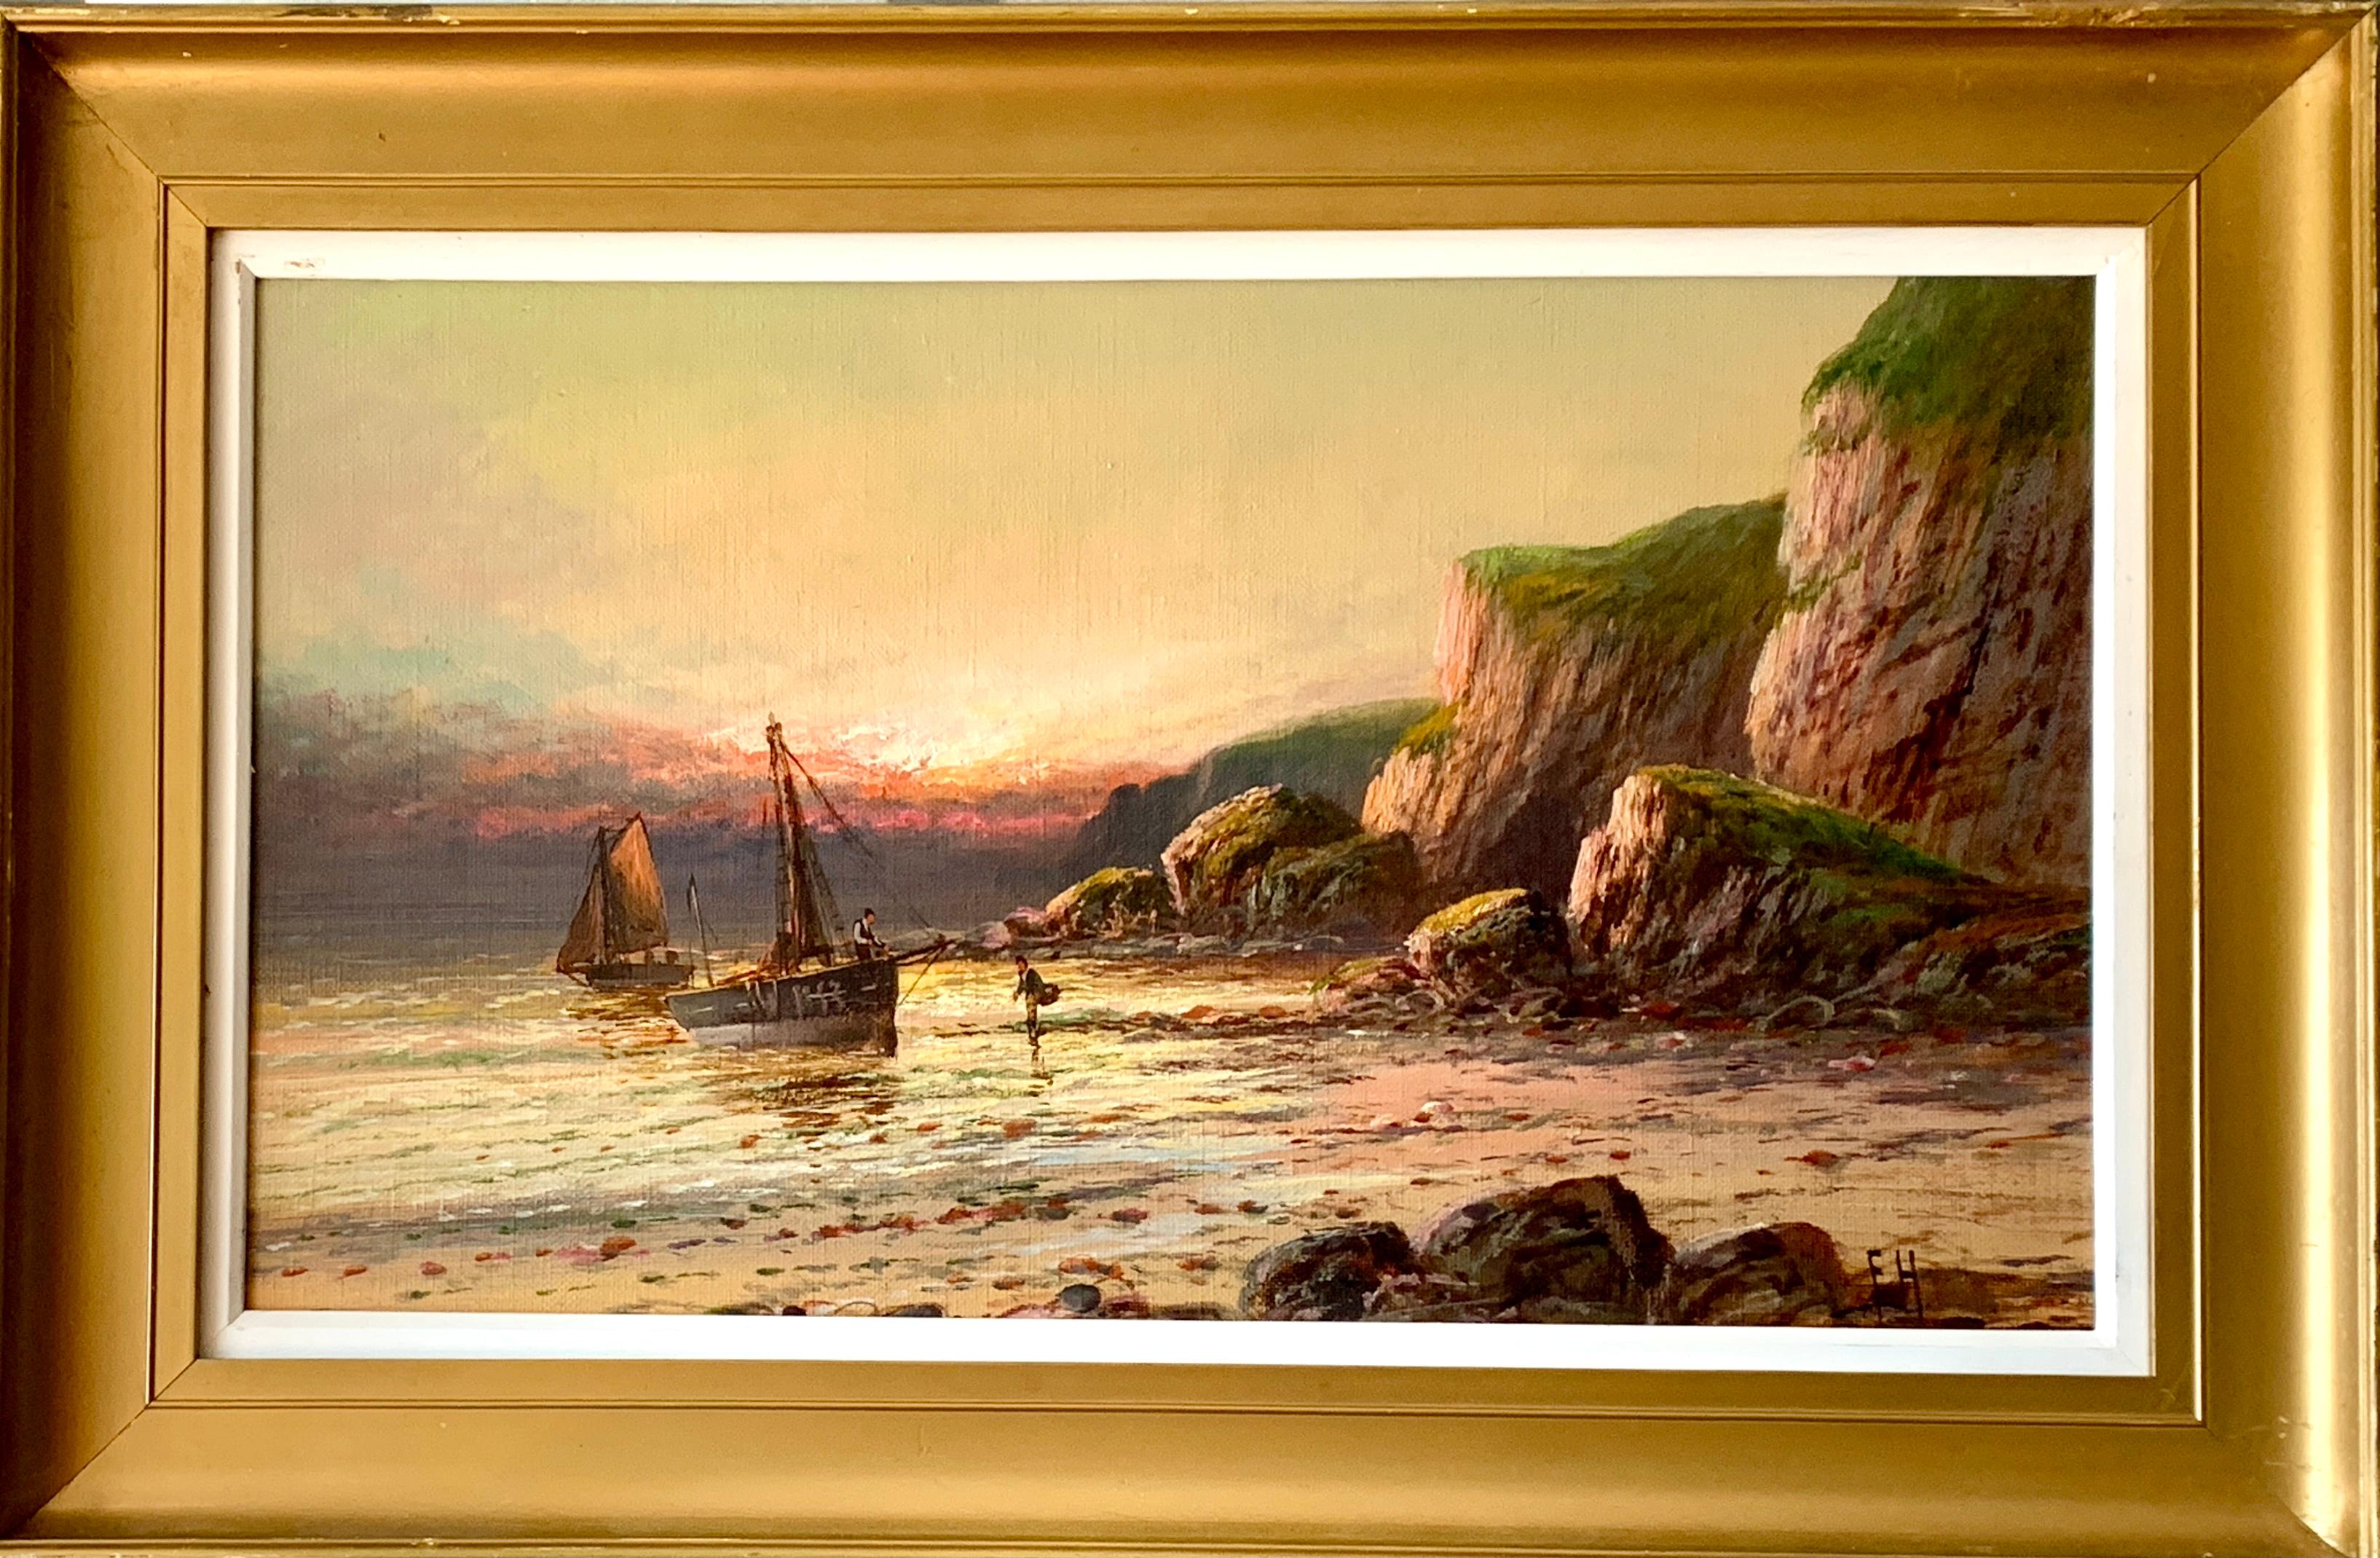 Francis Howard Figurative Painting - Antique oil painting of fishing boats on a beach at Sunset, landscape, English